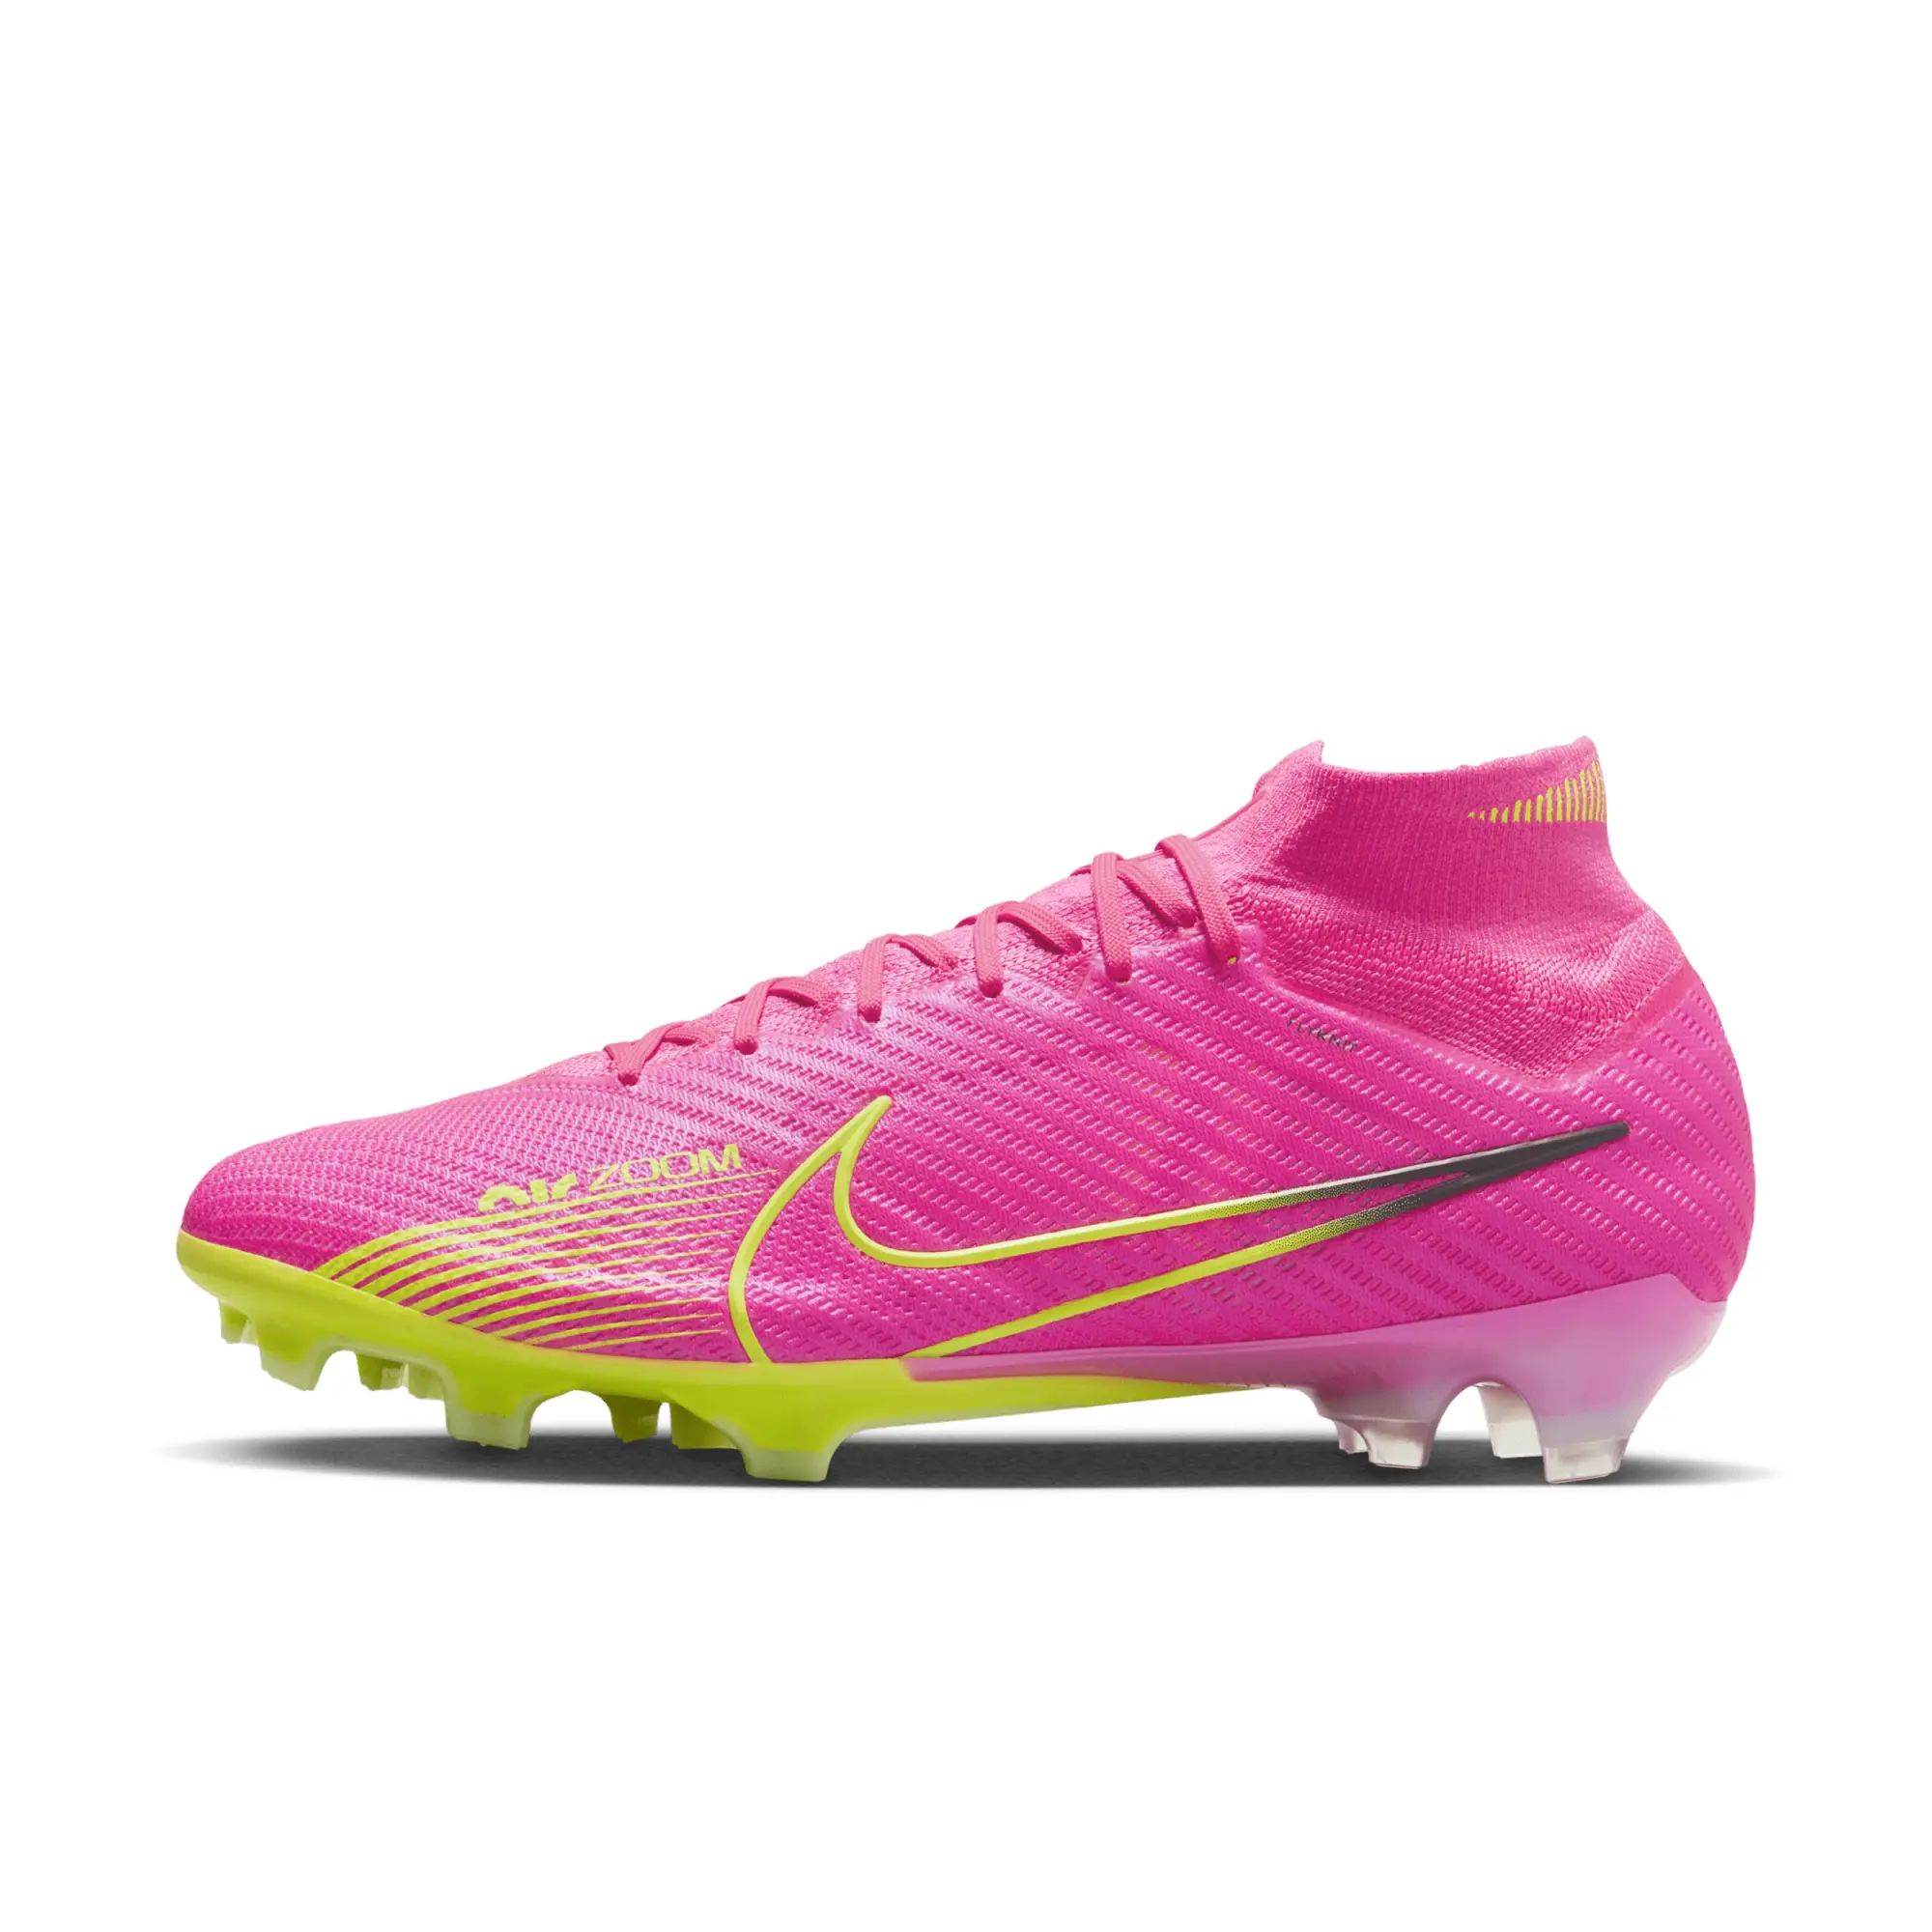 Nike Mercurial Superfly Elite DF FG Football Boots - Pink